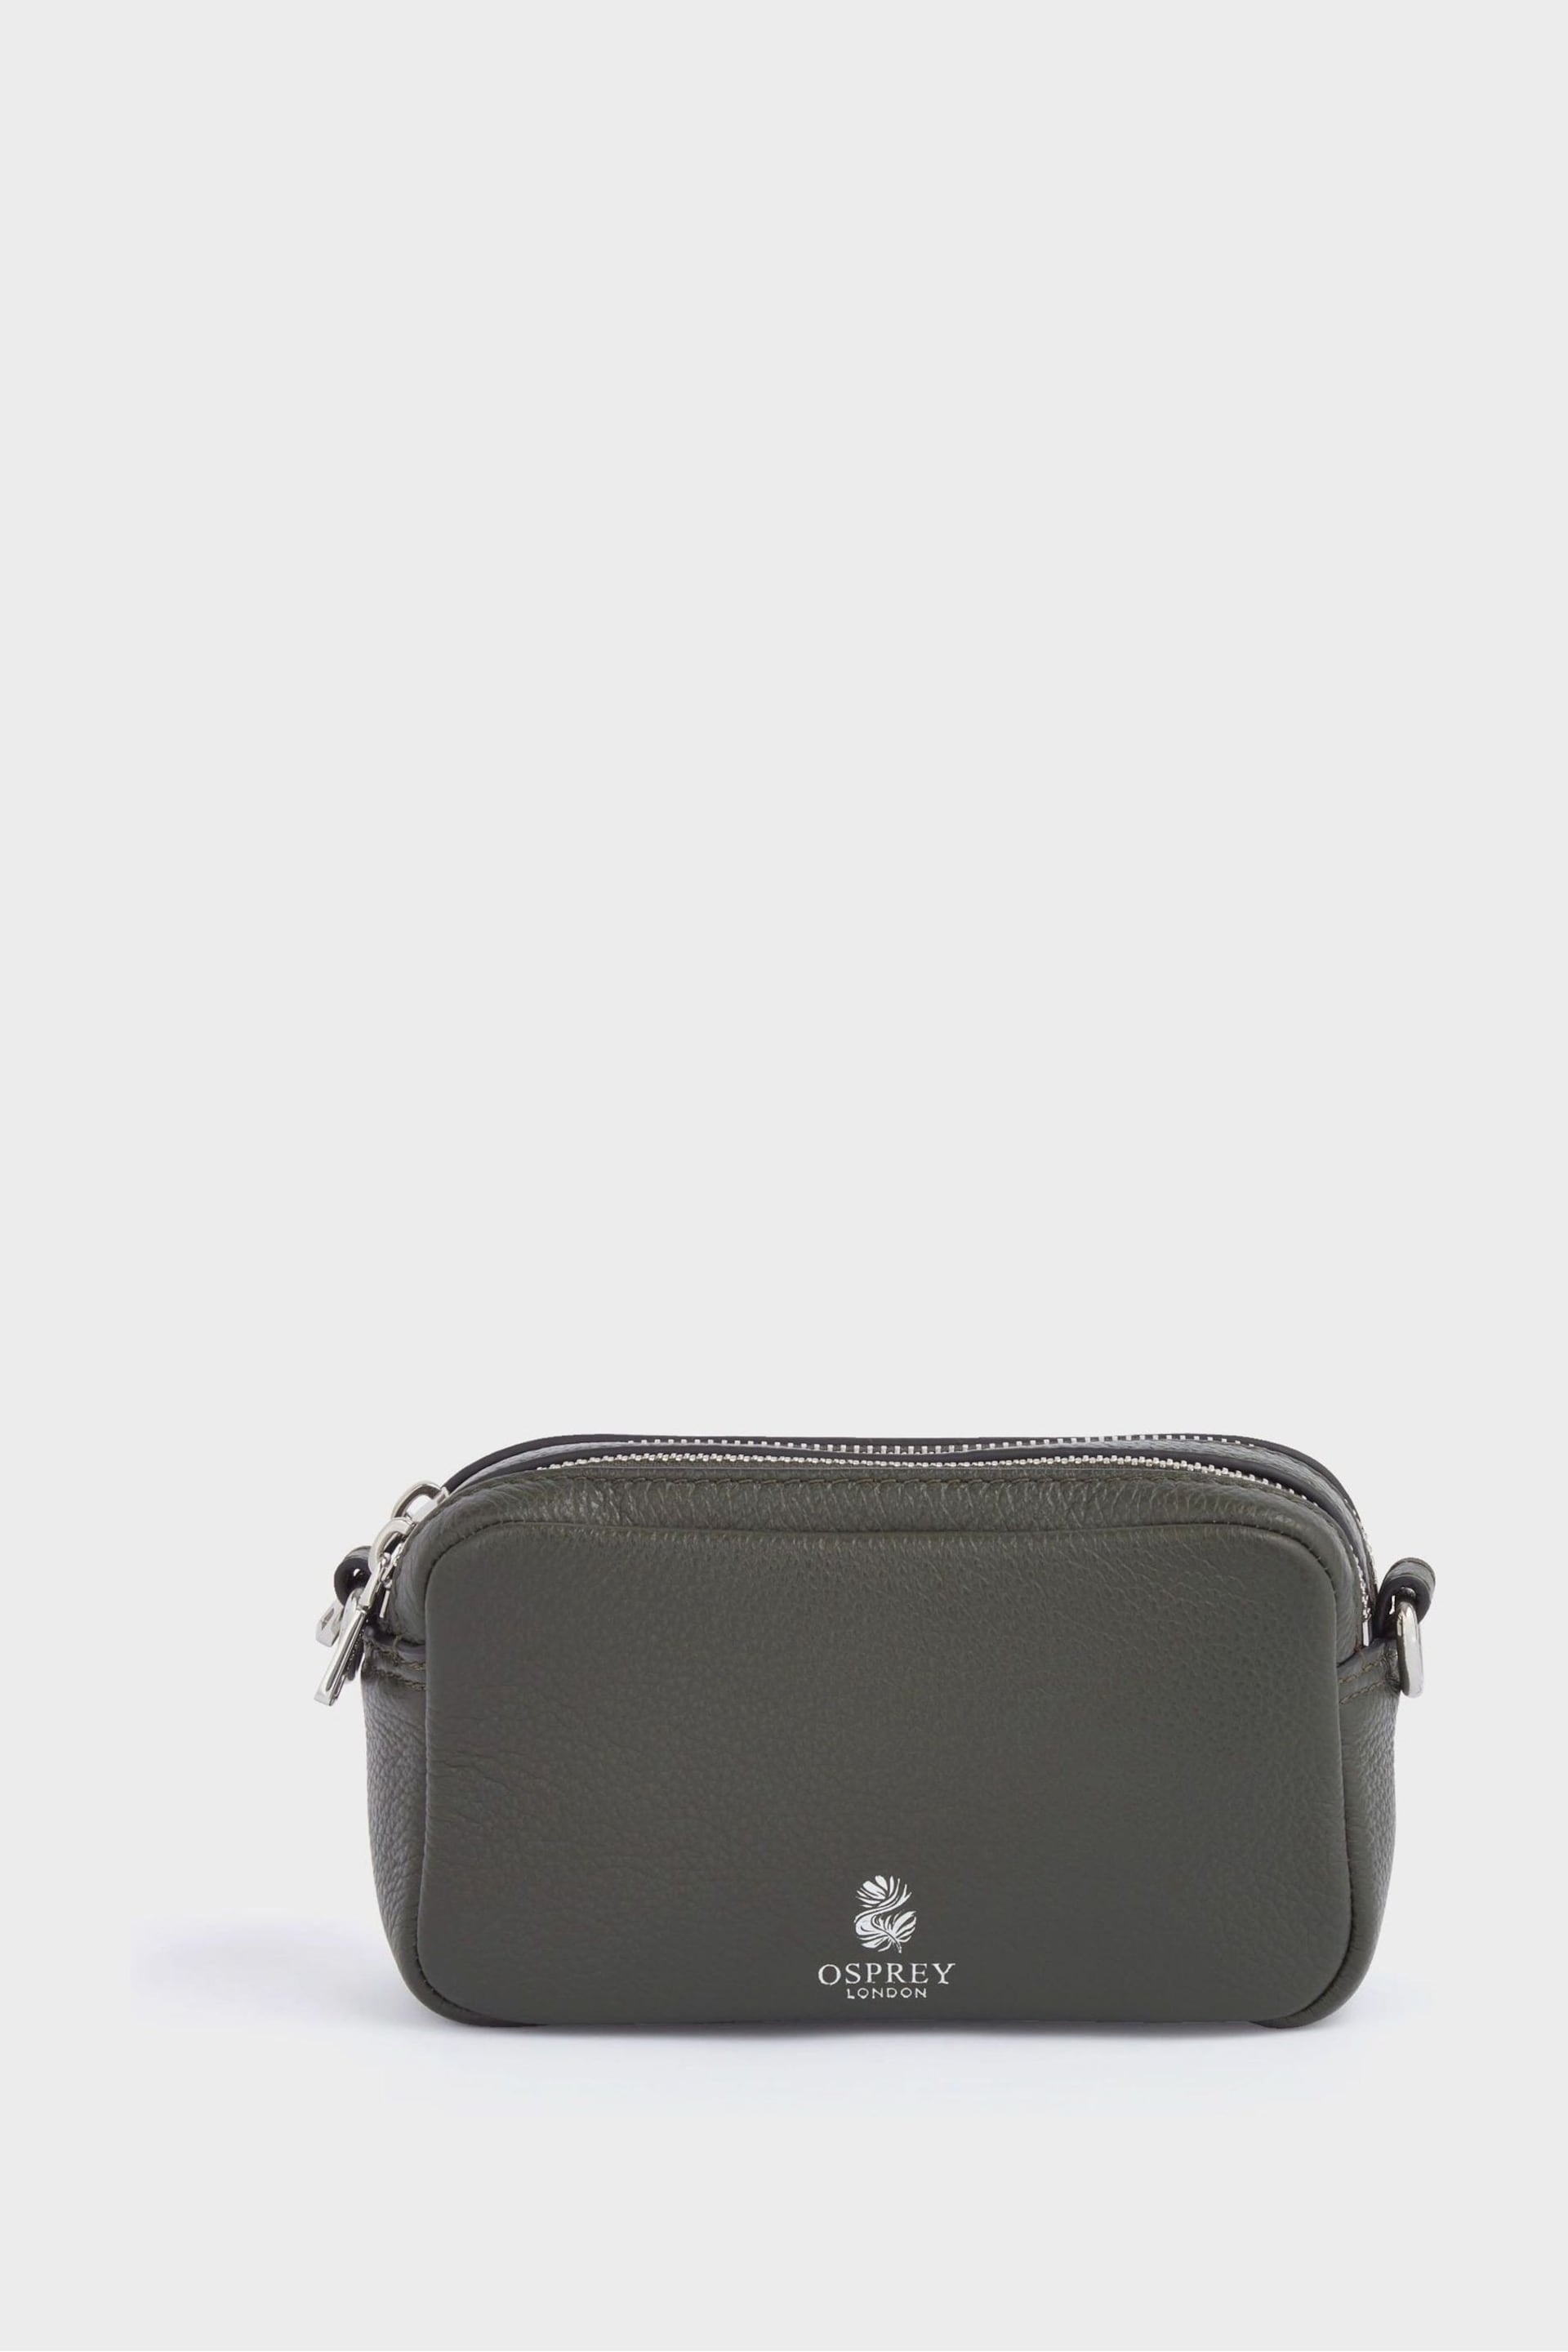 OSPREY LONDON Chester Leather Cross-Body - Image 2 of 7